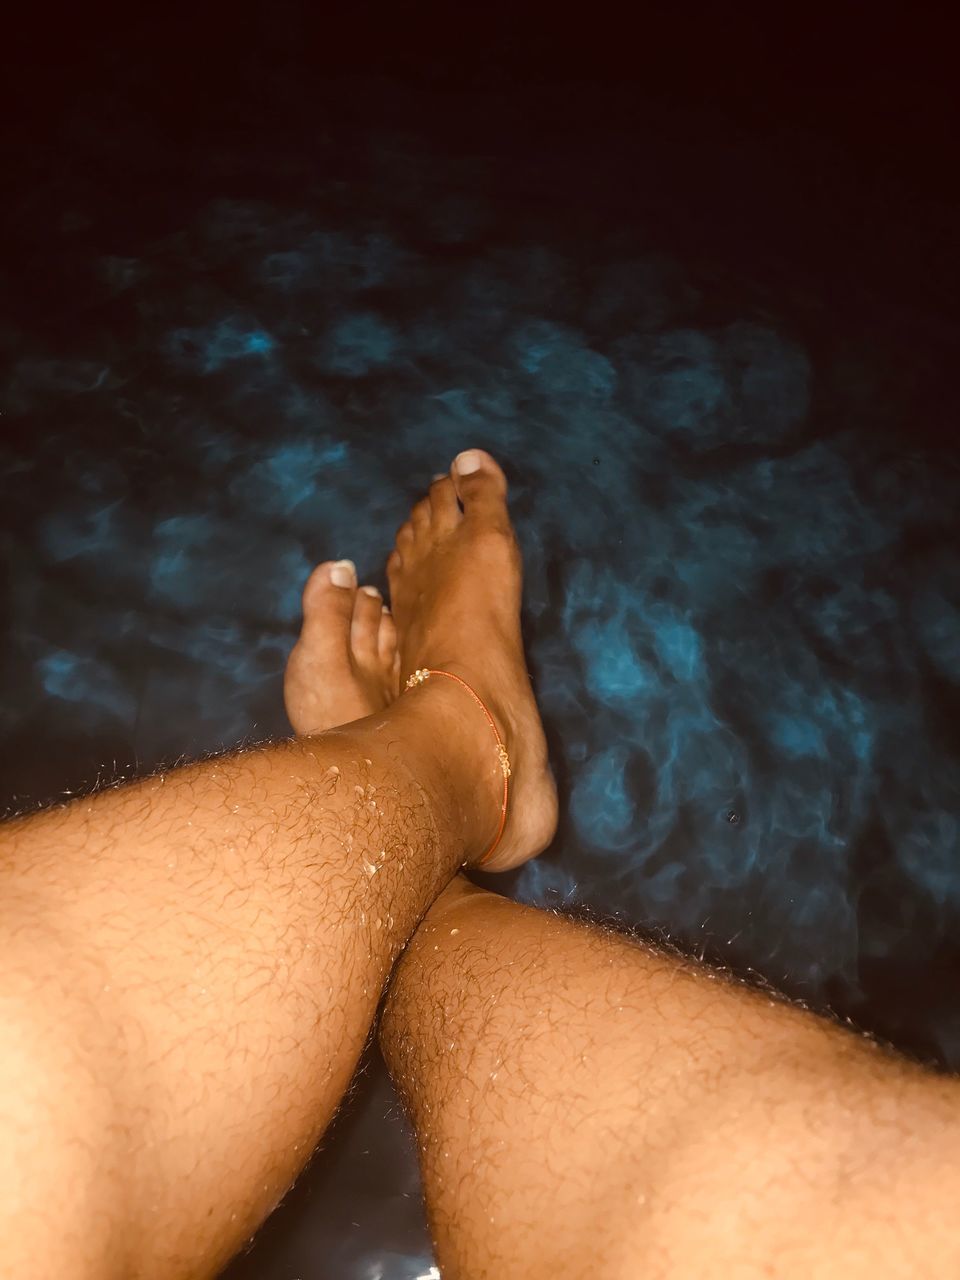 human body part, real people, lifestyles, body part, leisure activity, human leg, personal perspective, low section, water, men, nature, barefoot, relaxation, women, adult, wet, human foot, couple - relationship, human limb